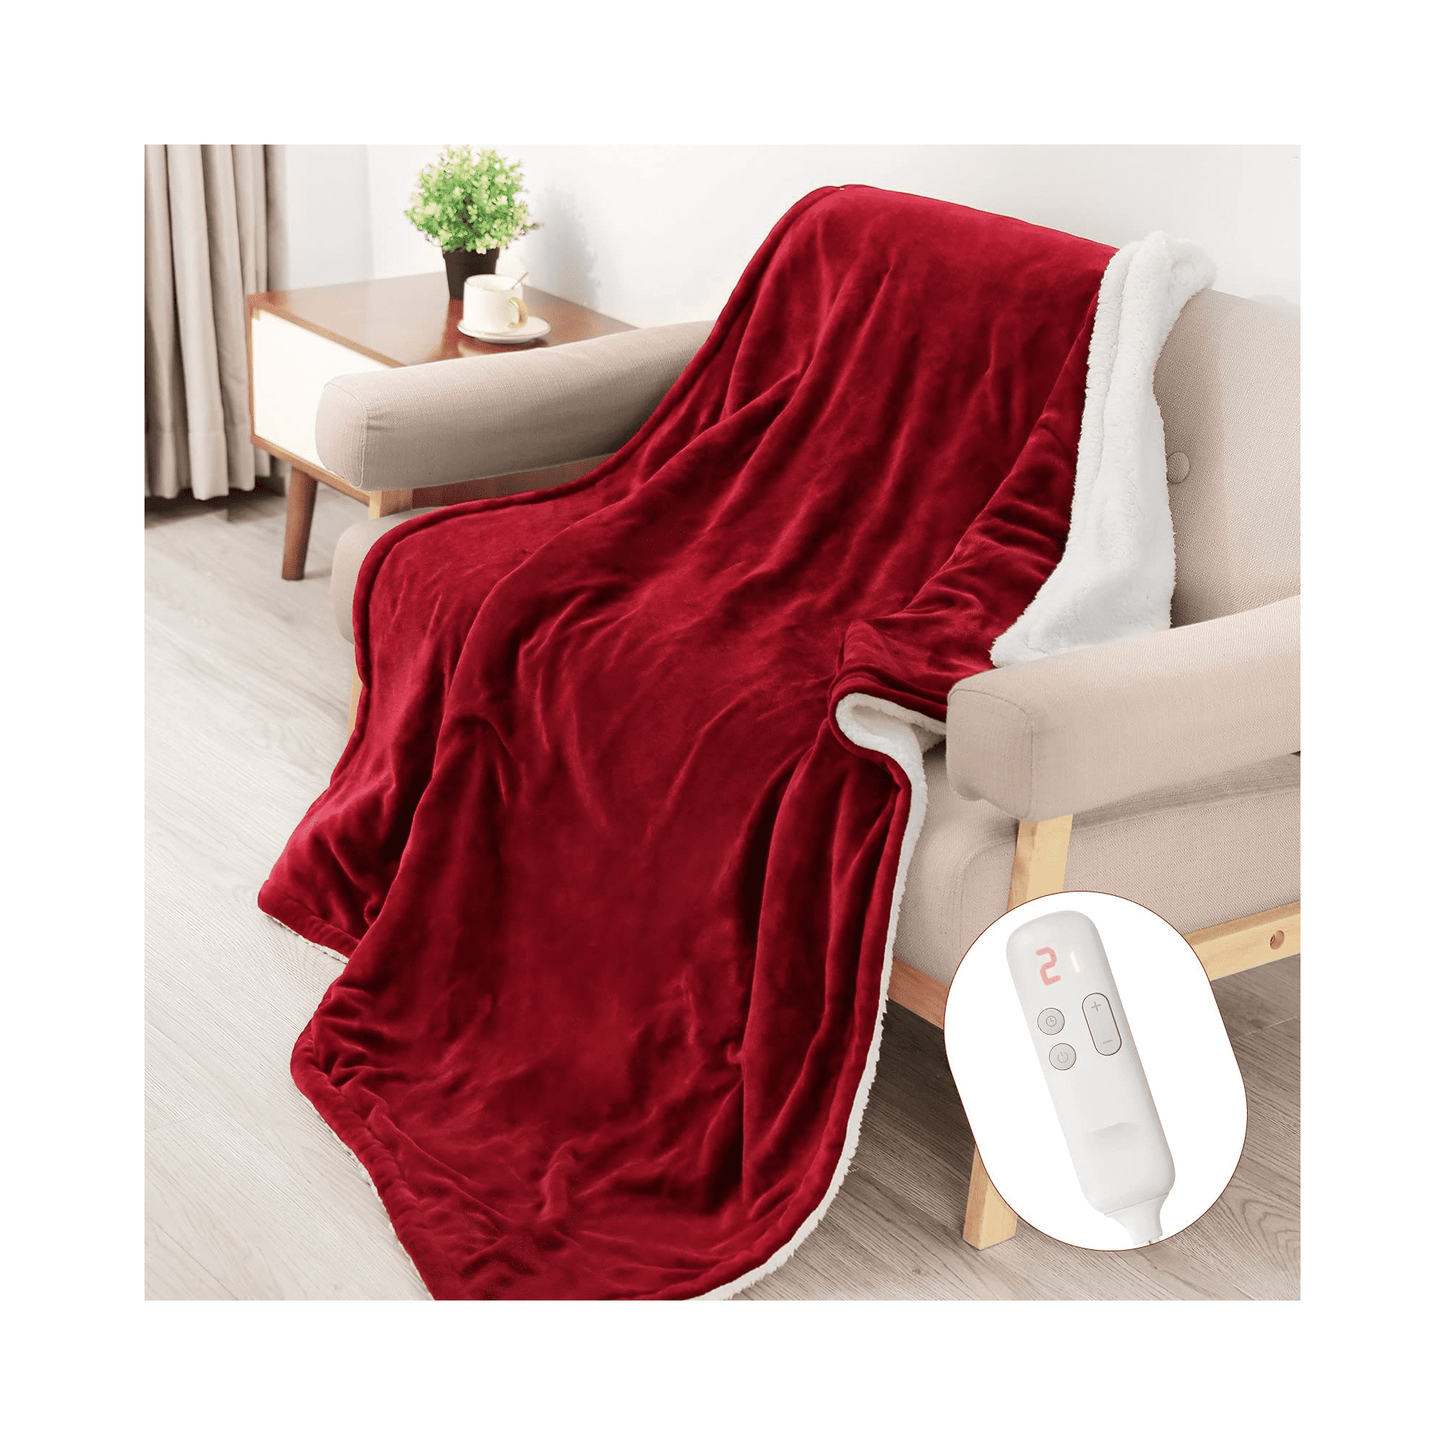 MaxKare Electric Blanket Heated Throw, Blanket 50" x 60", Flannel, Fast Heating, Machine Washable, ETL Certification, with 6 Heating Levels & 5 Hours Auto-Off for Home Office Use